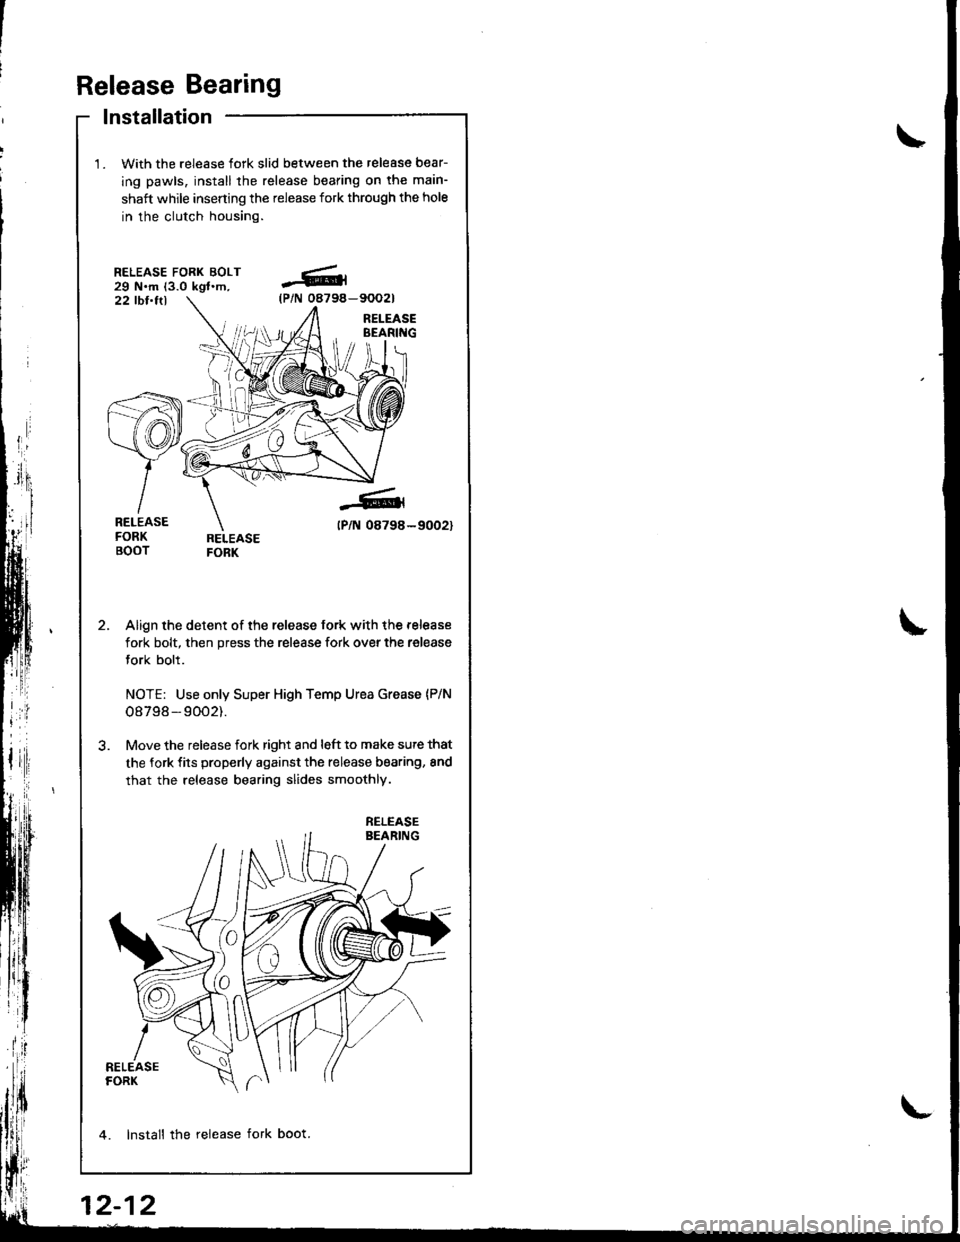 HONDA INTEGRA 1998 4.G Workshop Manual Release Bearing
lnstallation
With the release fork slid between the release bear-
ing pawls, install the release bearing on tha main-
shaft while inserting the release fork through the hole
in the clu